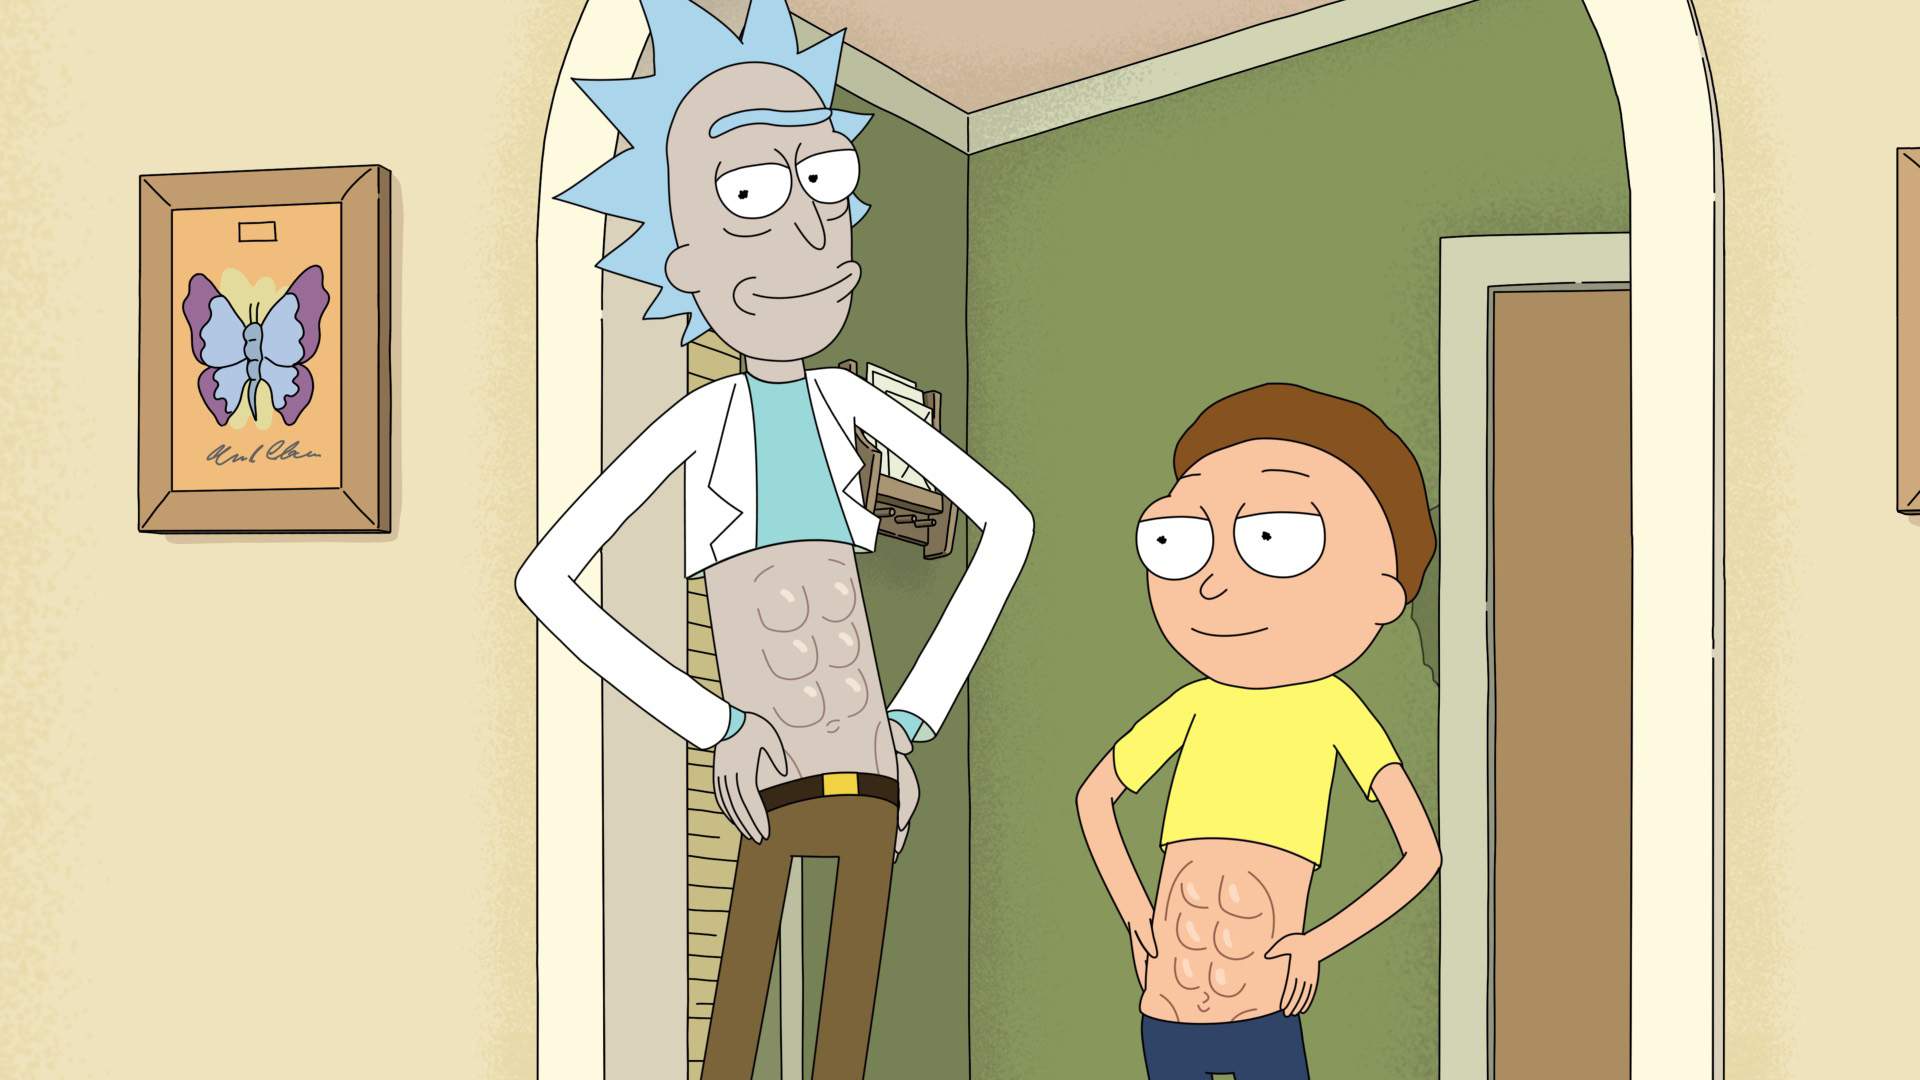 Wubba Lubba Dub Dub: 'Rick and Morty' Season Six Will Beam Into Your Streaming Queue This Spring